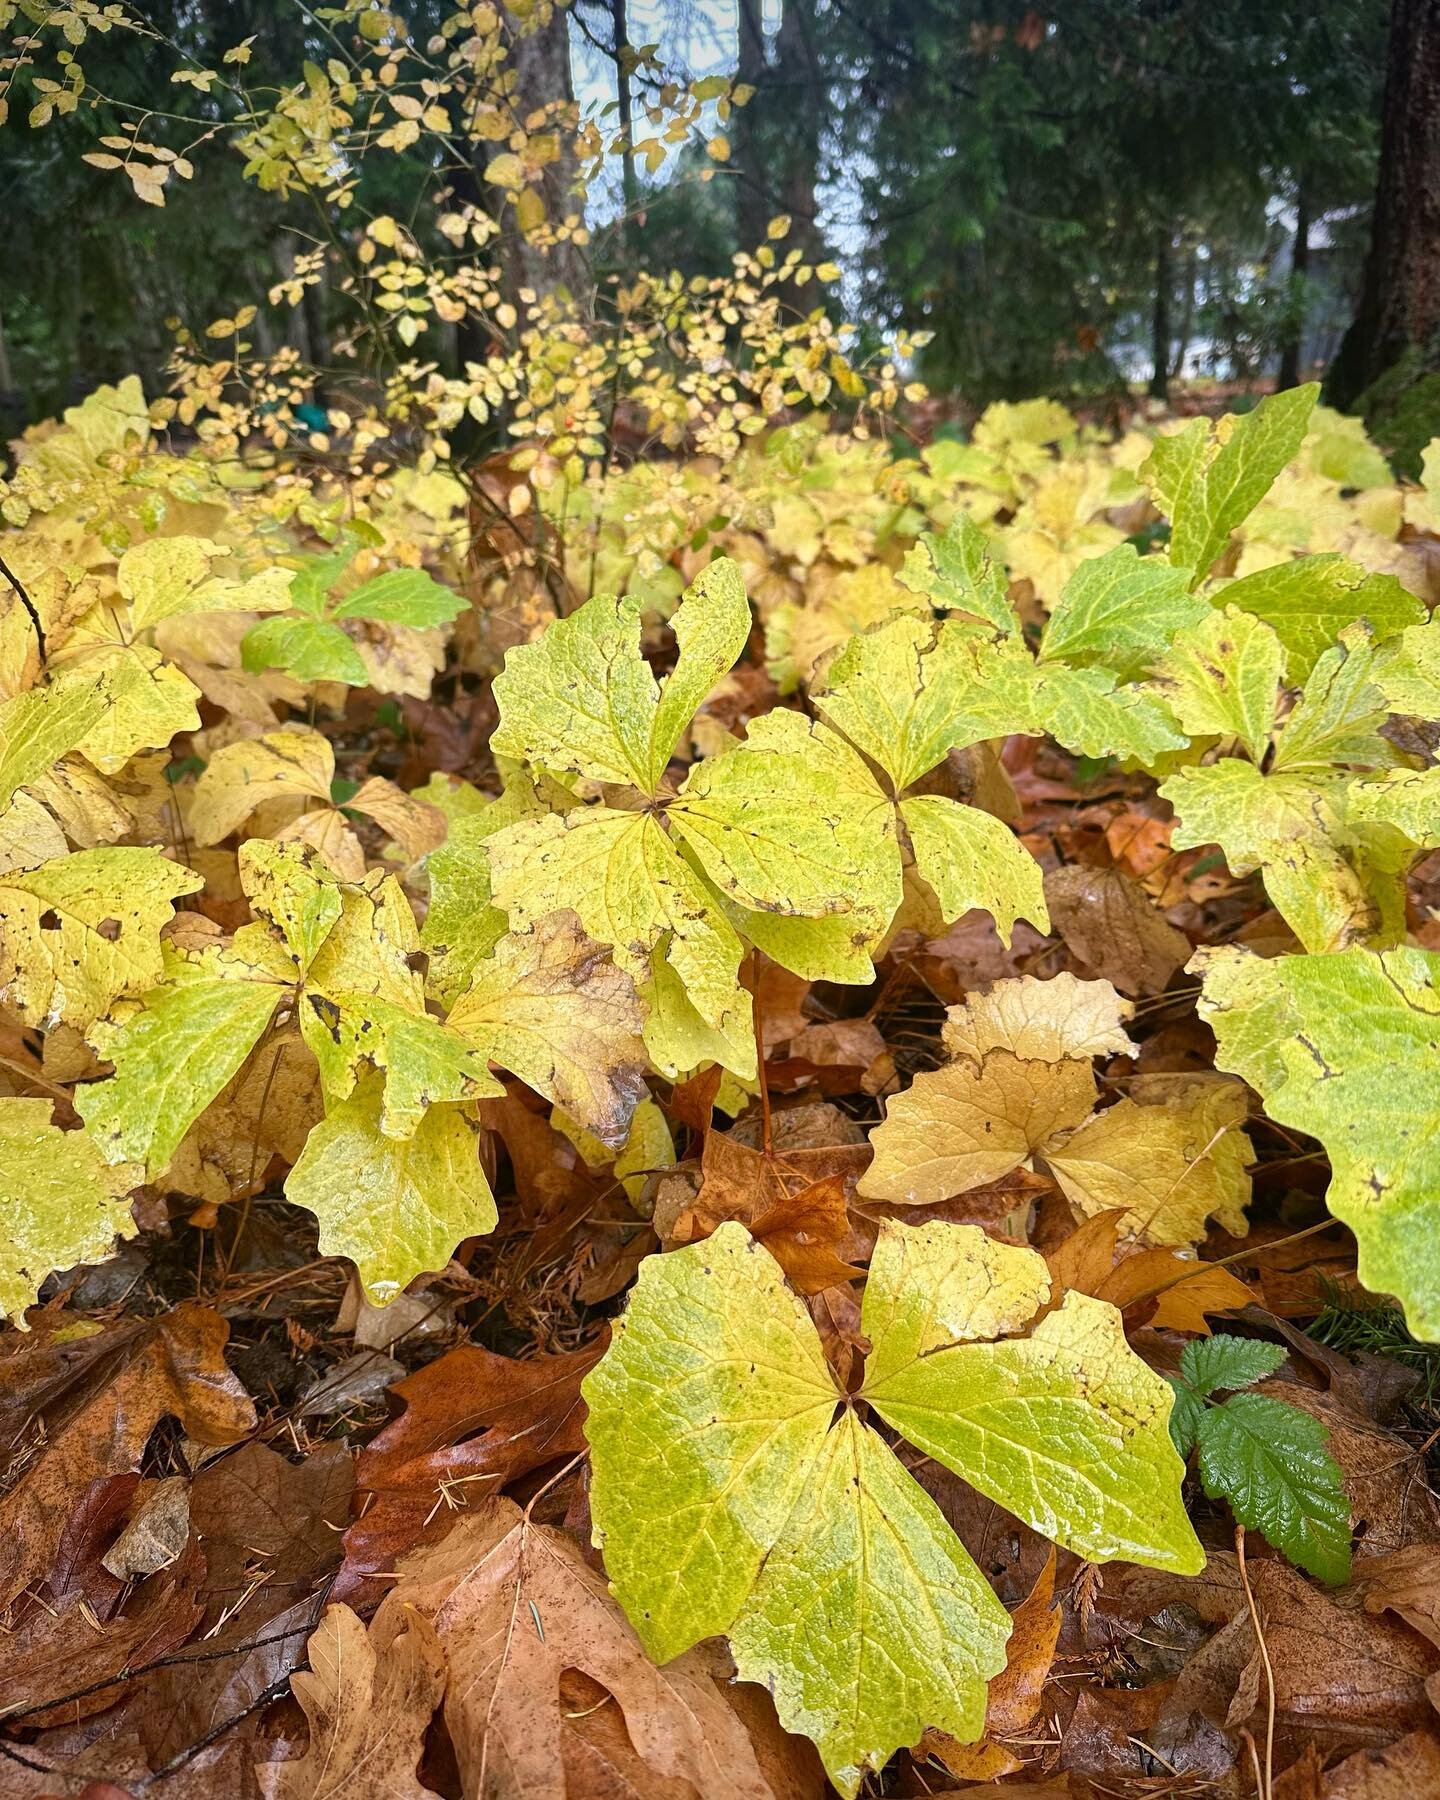 We were appreciating the glowing fall color of vanilla leaf yesterday on the blustery rainy day. The bright yellow brought a bit of sunshine into the dark woods (along with a Baldhip Rose)! Extra beautiful contrasted against the orange of fallen leav